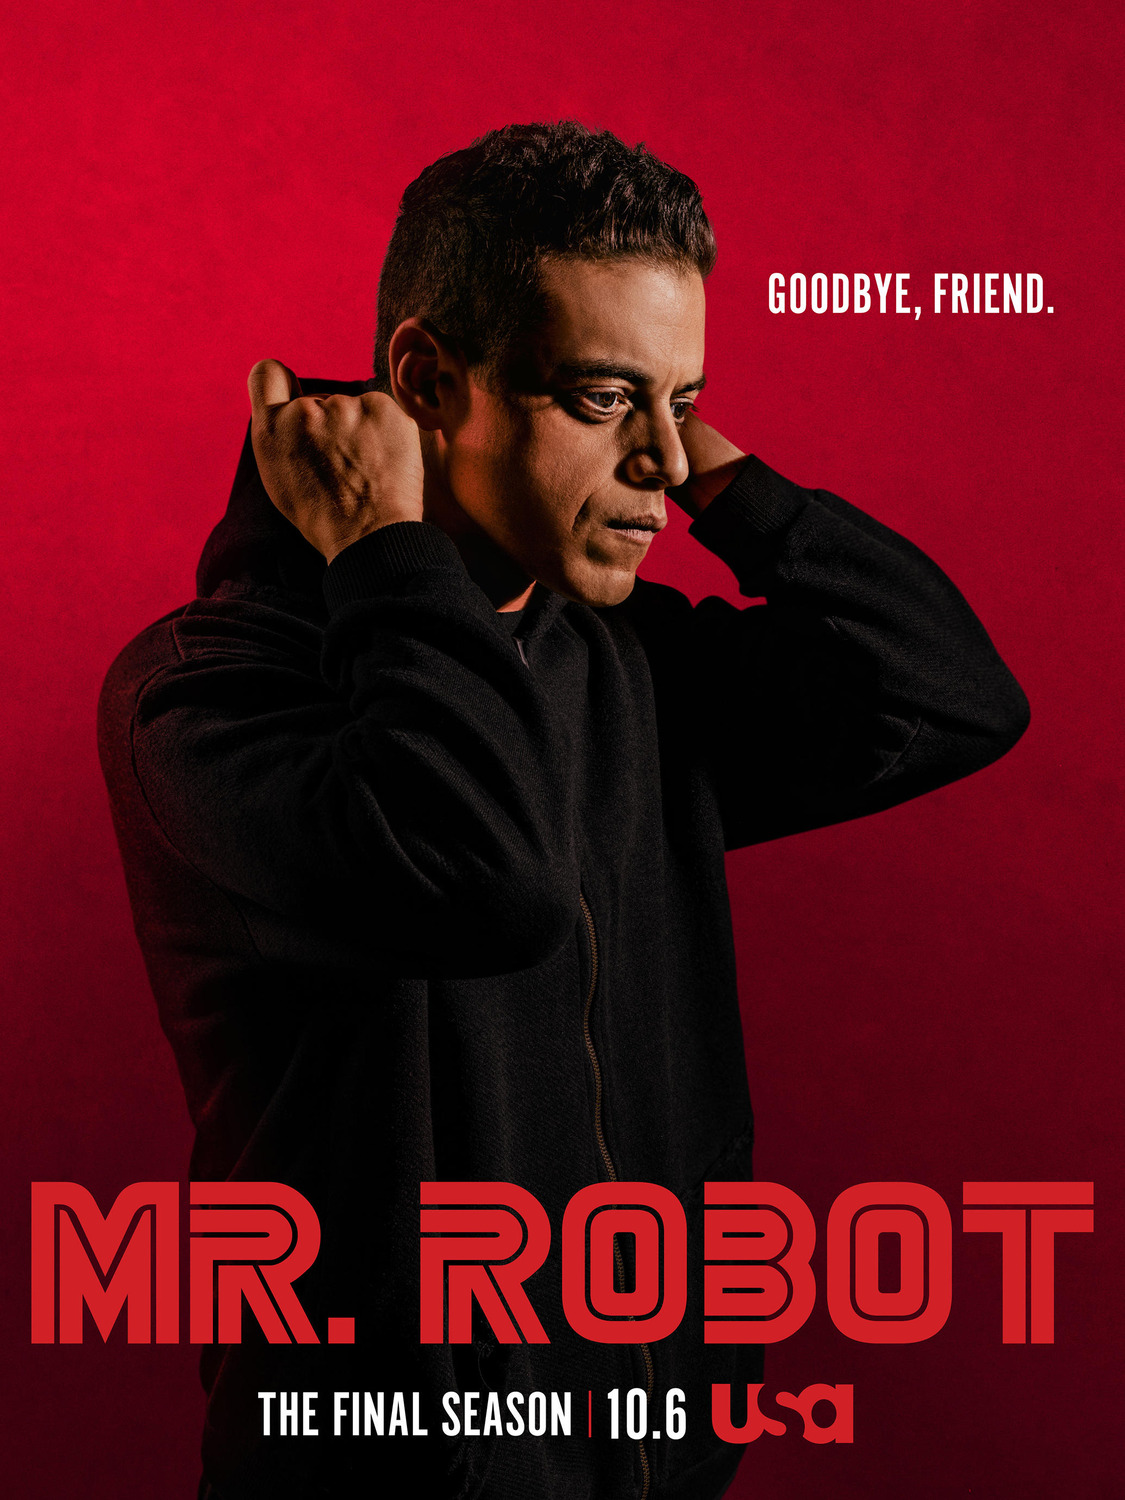 Extra Large Movie Poster Image for Mr. Robot (#17 of 17)